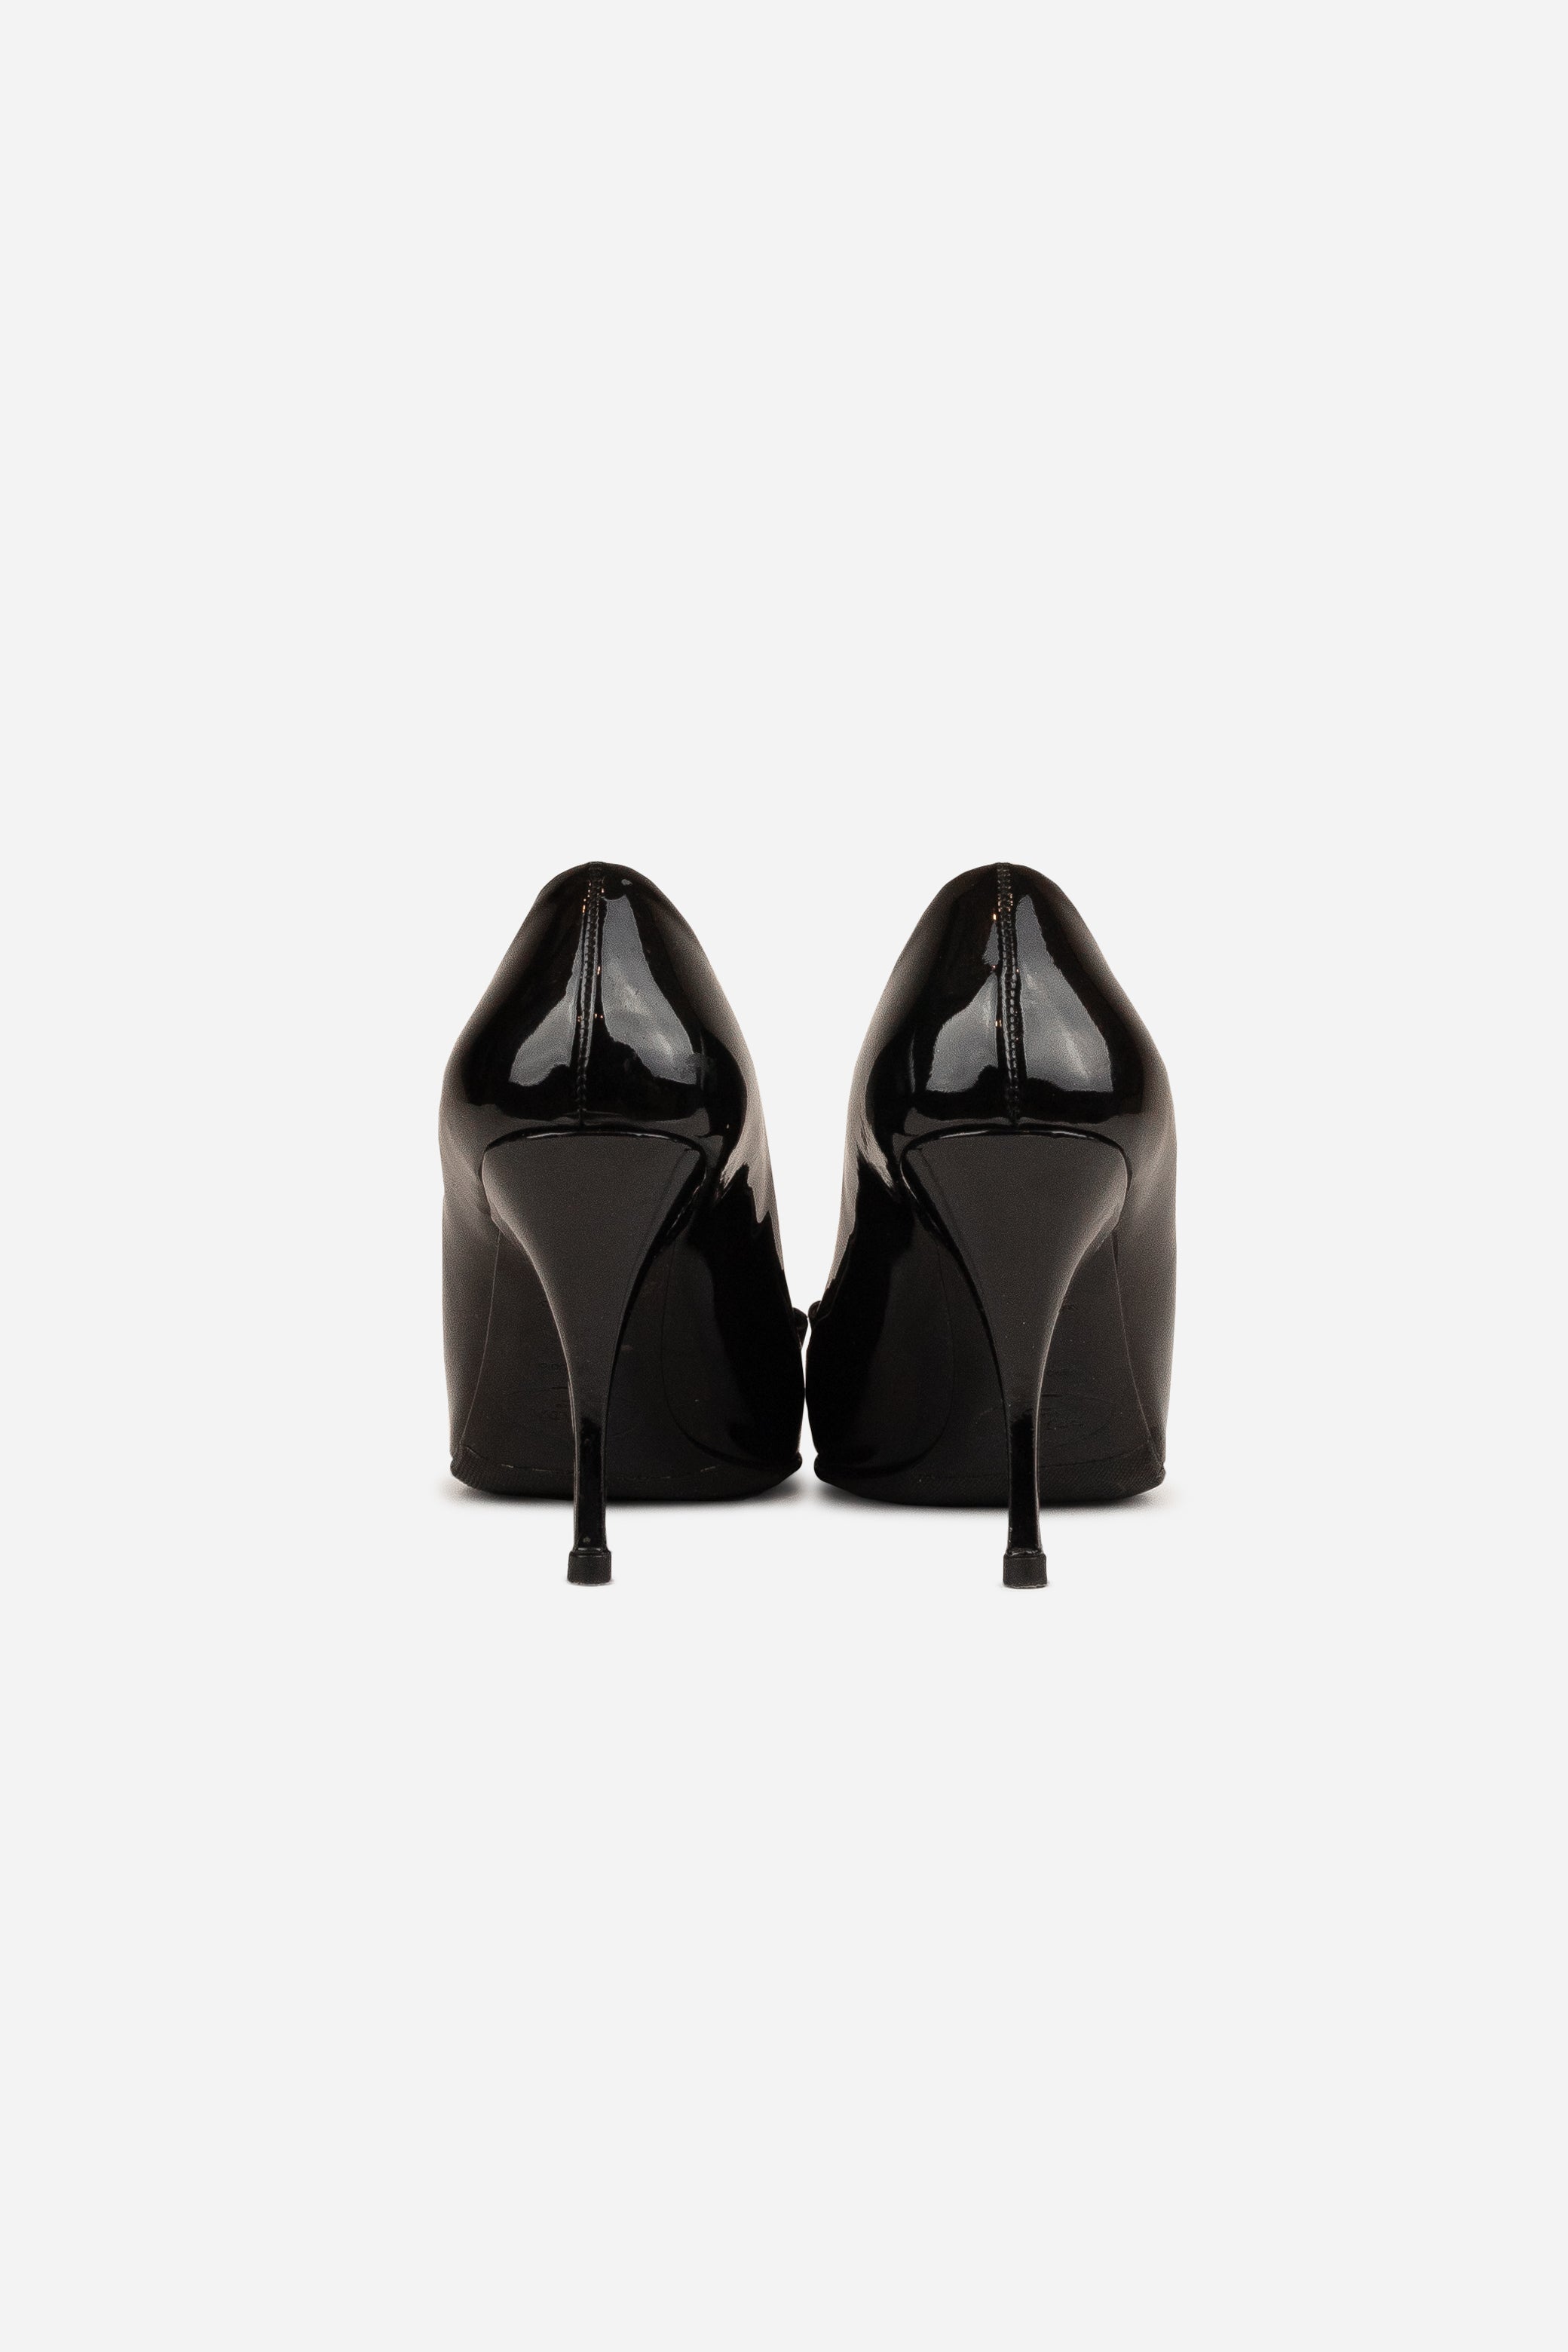 Black Patent Leather Bow Detailed Pumps - So Over It Luxury Consignment